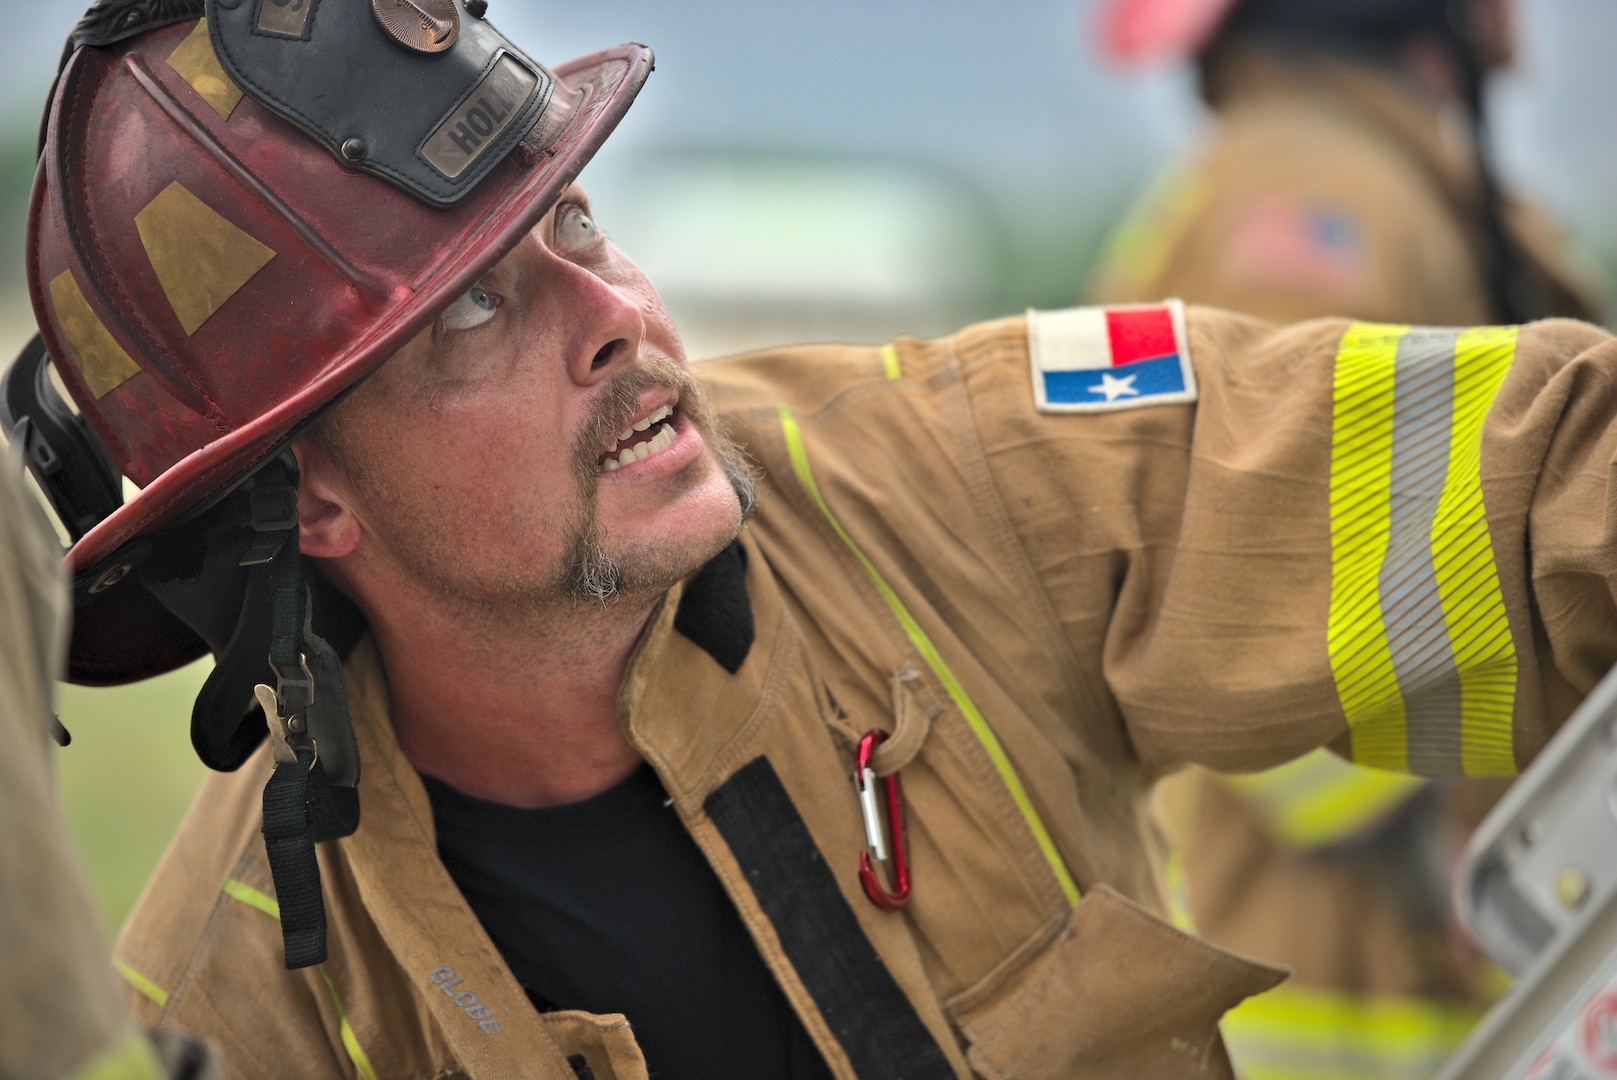 Schertz Fire Rescue Lt. Tom Hollick, lead instructor, demonstrates how to position a ladder during training at Joint Base San Antonio-Randolph, Texas, April 12, 2021.